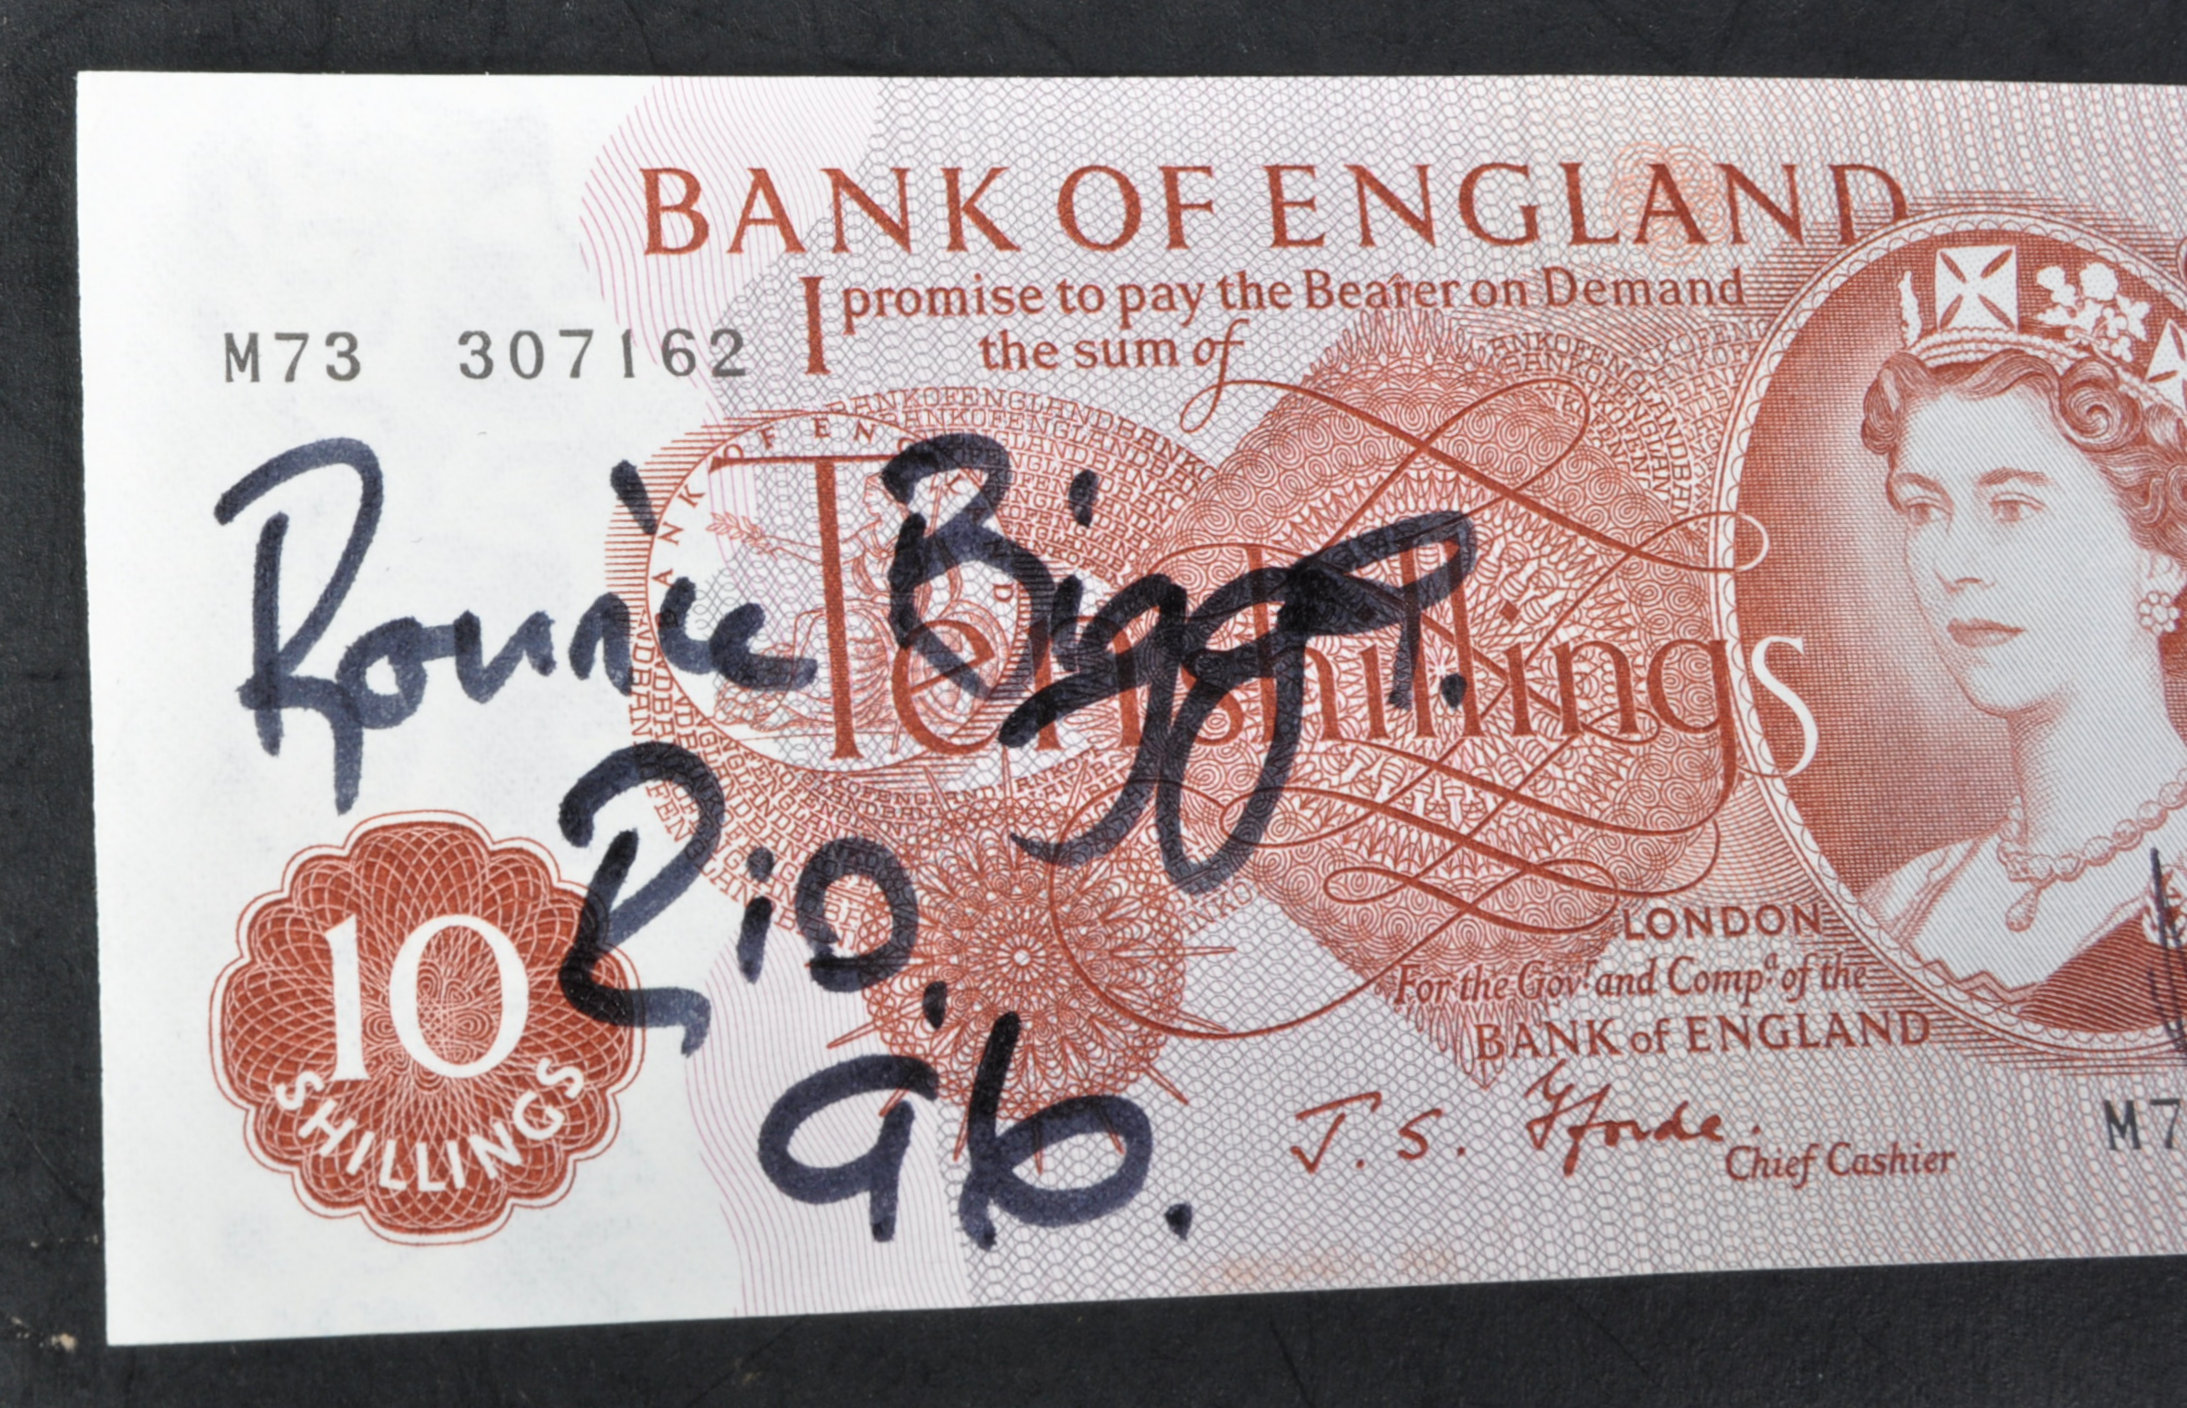 GREAT TRAIN ROBBERY - RONNIE BIGGS SIGNED BANK NOTES - Image 4 of 6